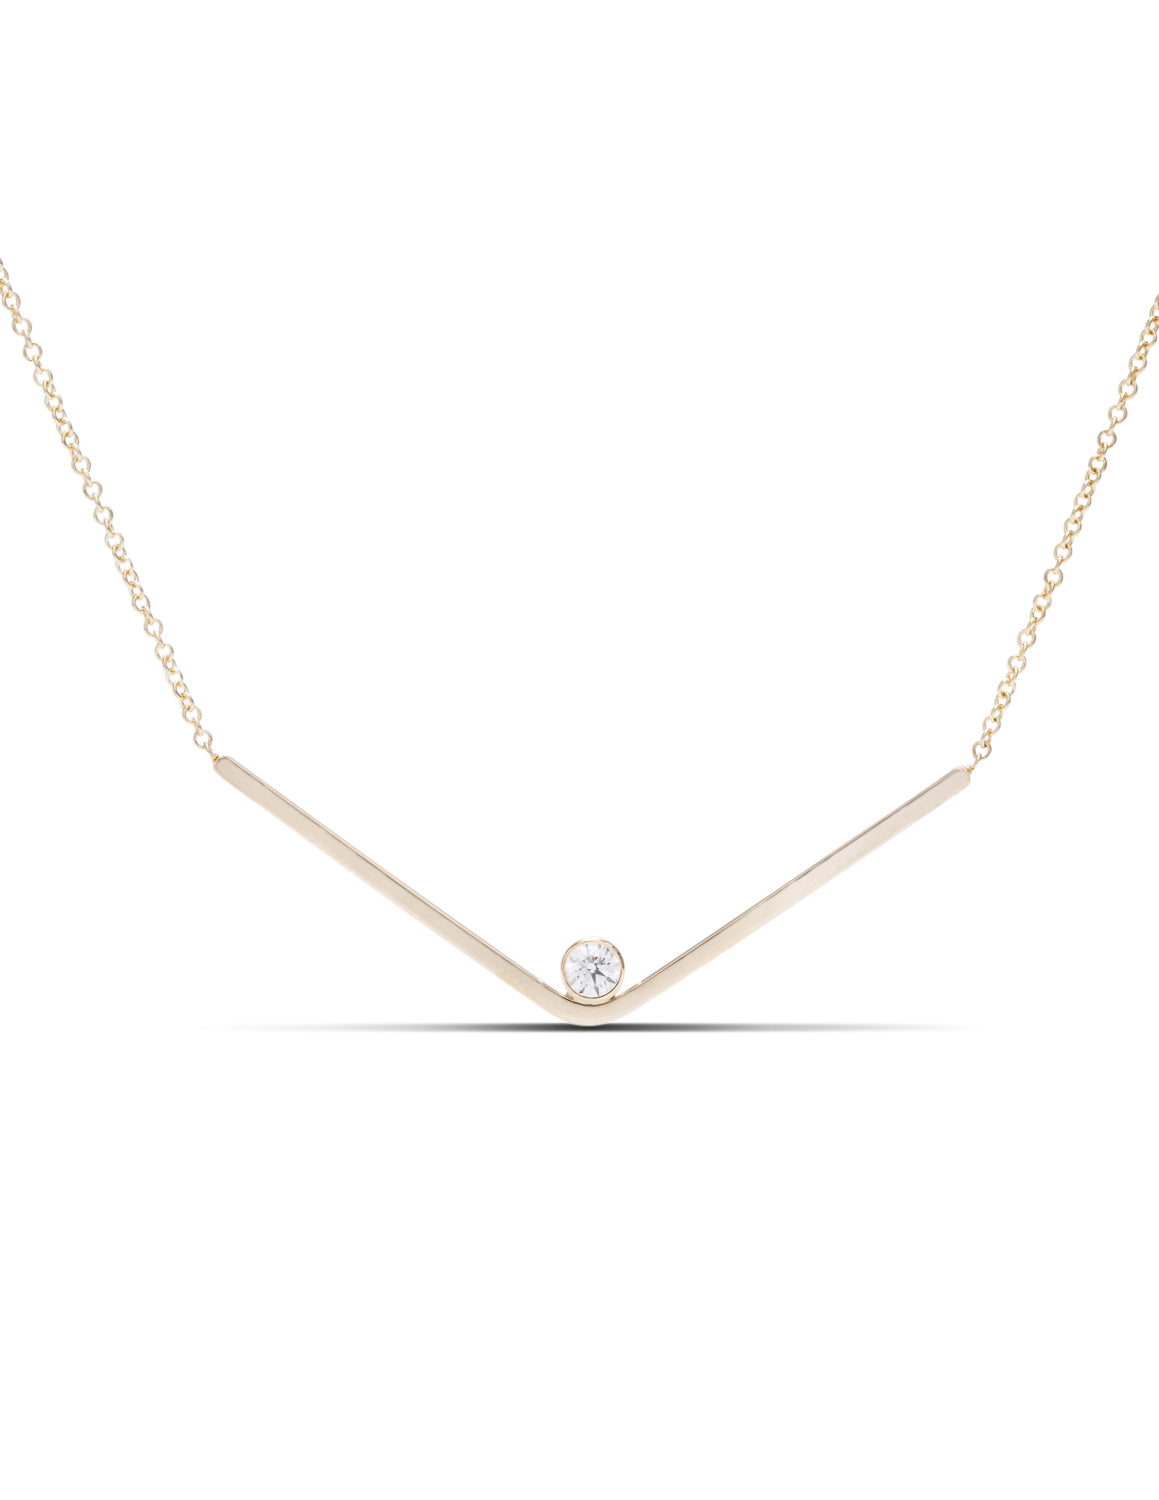 Yellow Gold and Diamond Gravity Bar Necklace - Charles Koll Jewellers